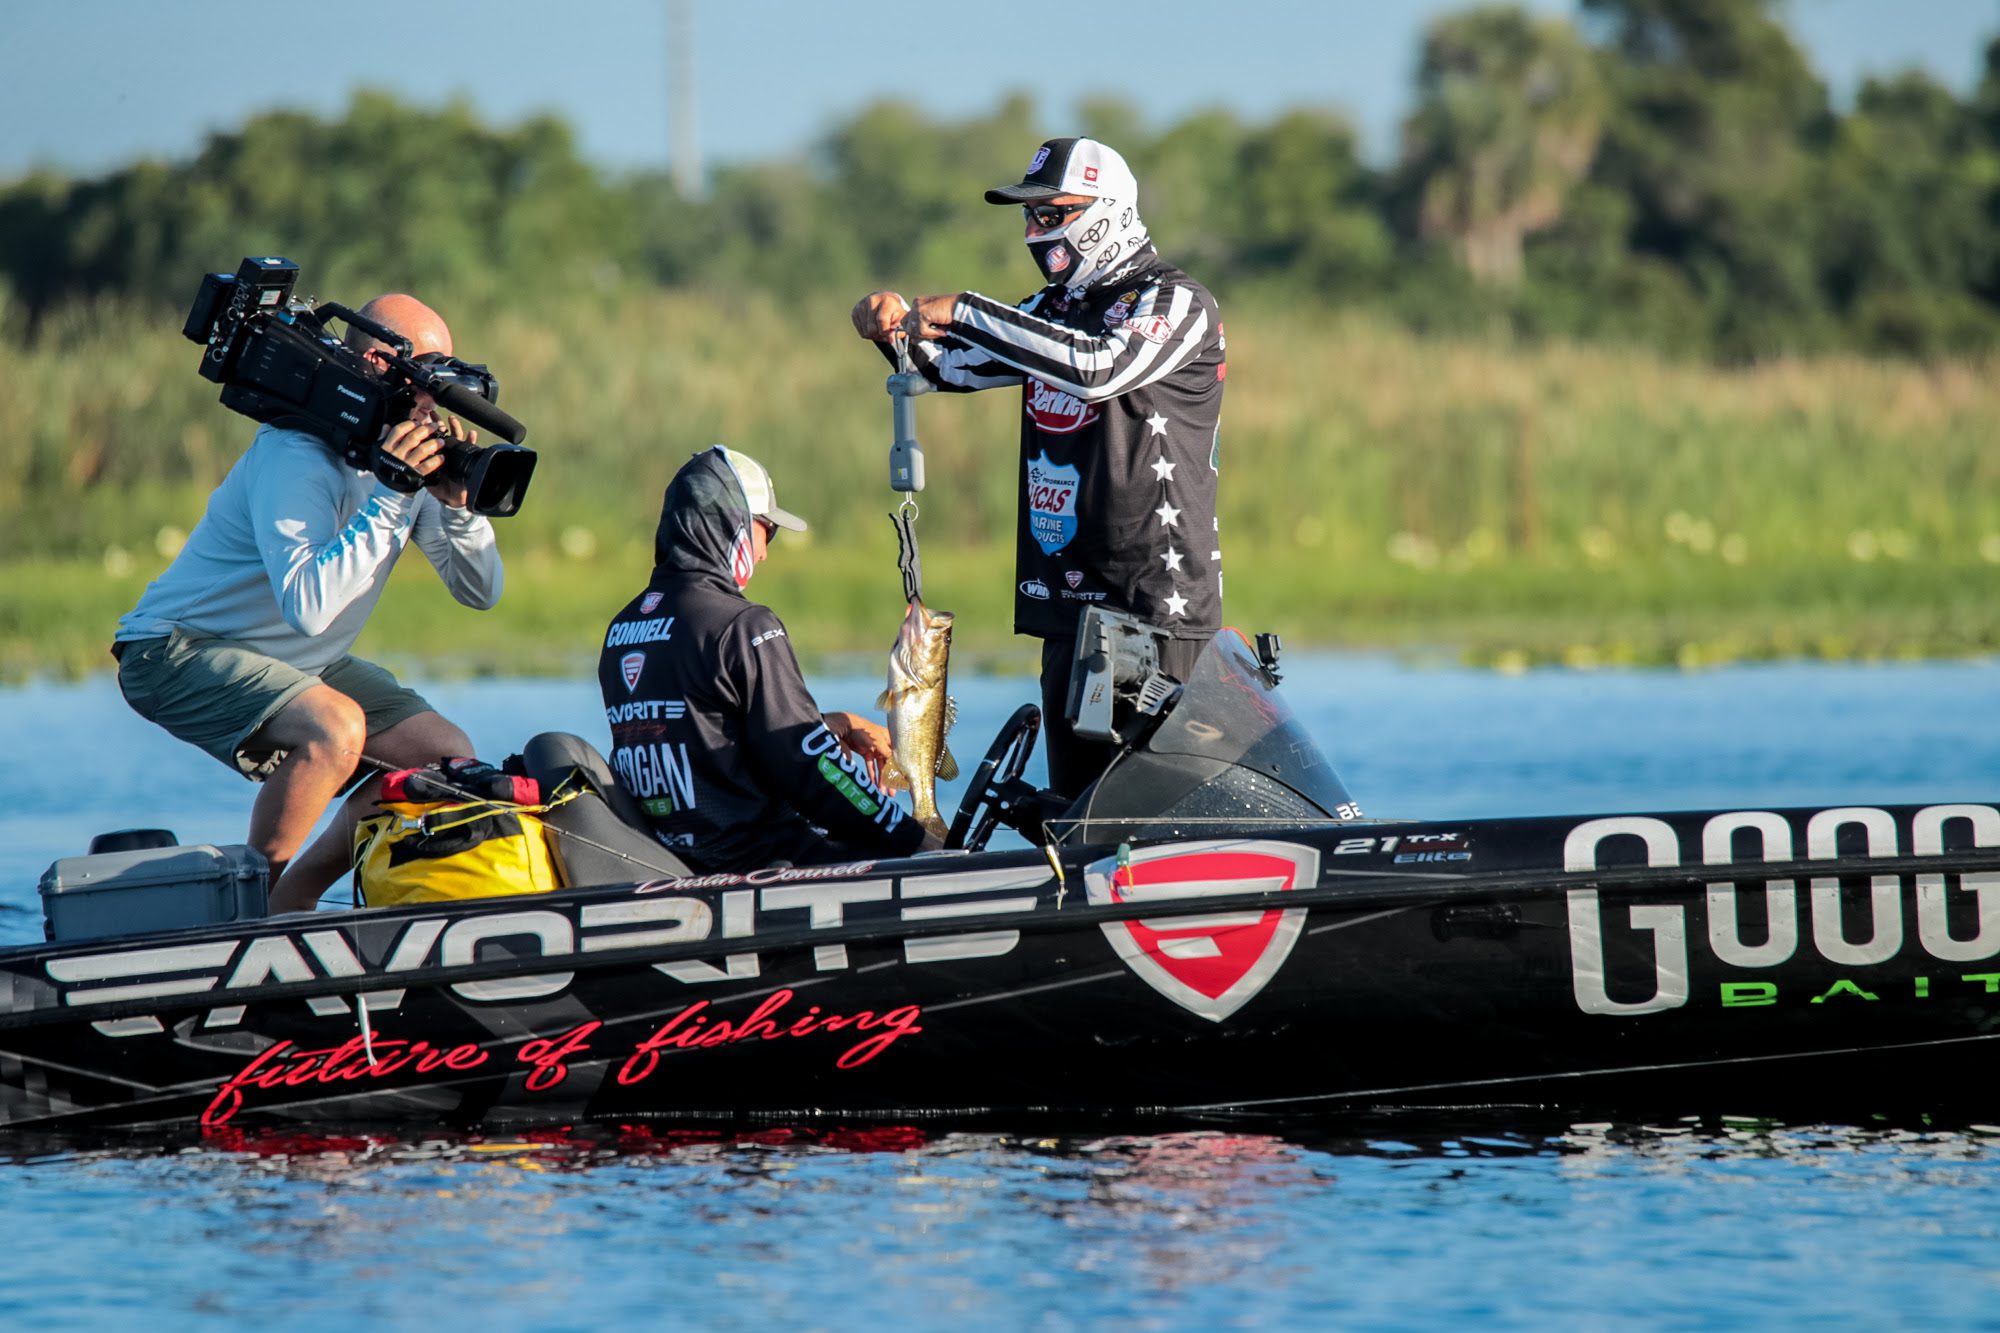 Randy Howell's boat giveaway - Bassmaster